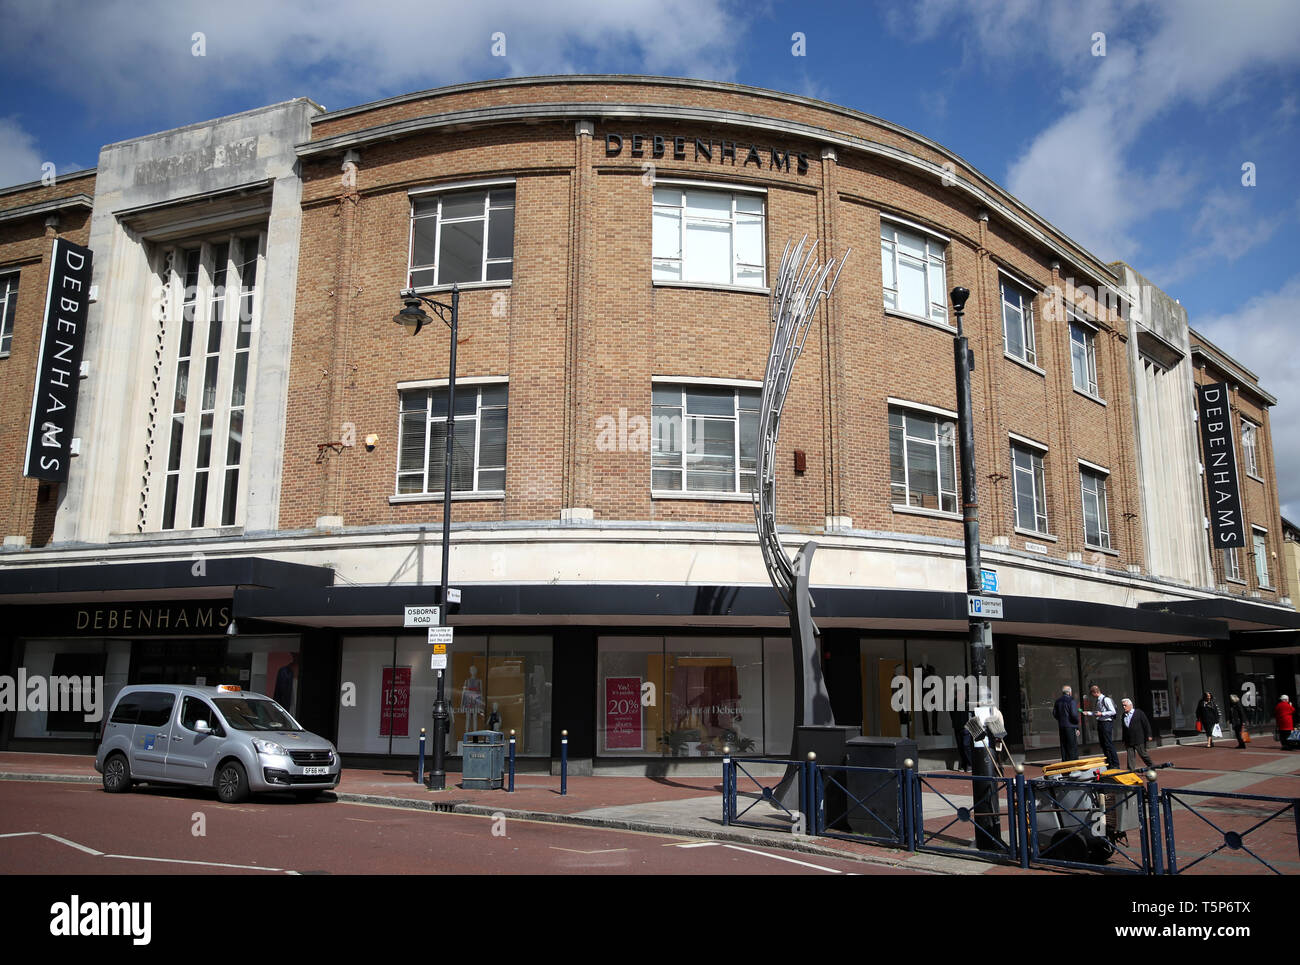 The Debenhams department store in Southsea, Hampshire, which has been named as one of 22 stores to be closed, putting 1,200 jobs at risk across the department store chain. Stock Photo